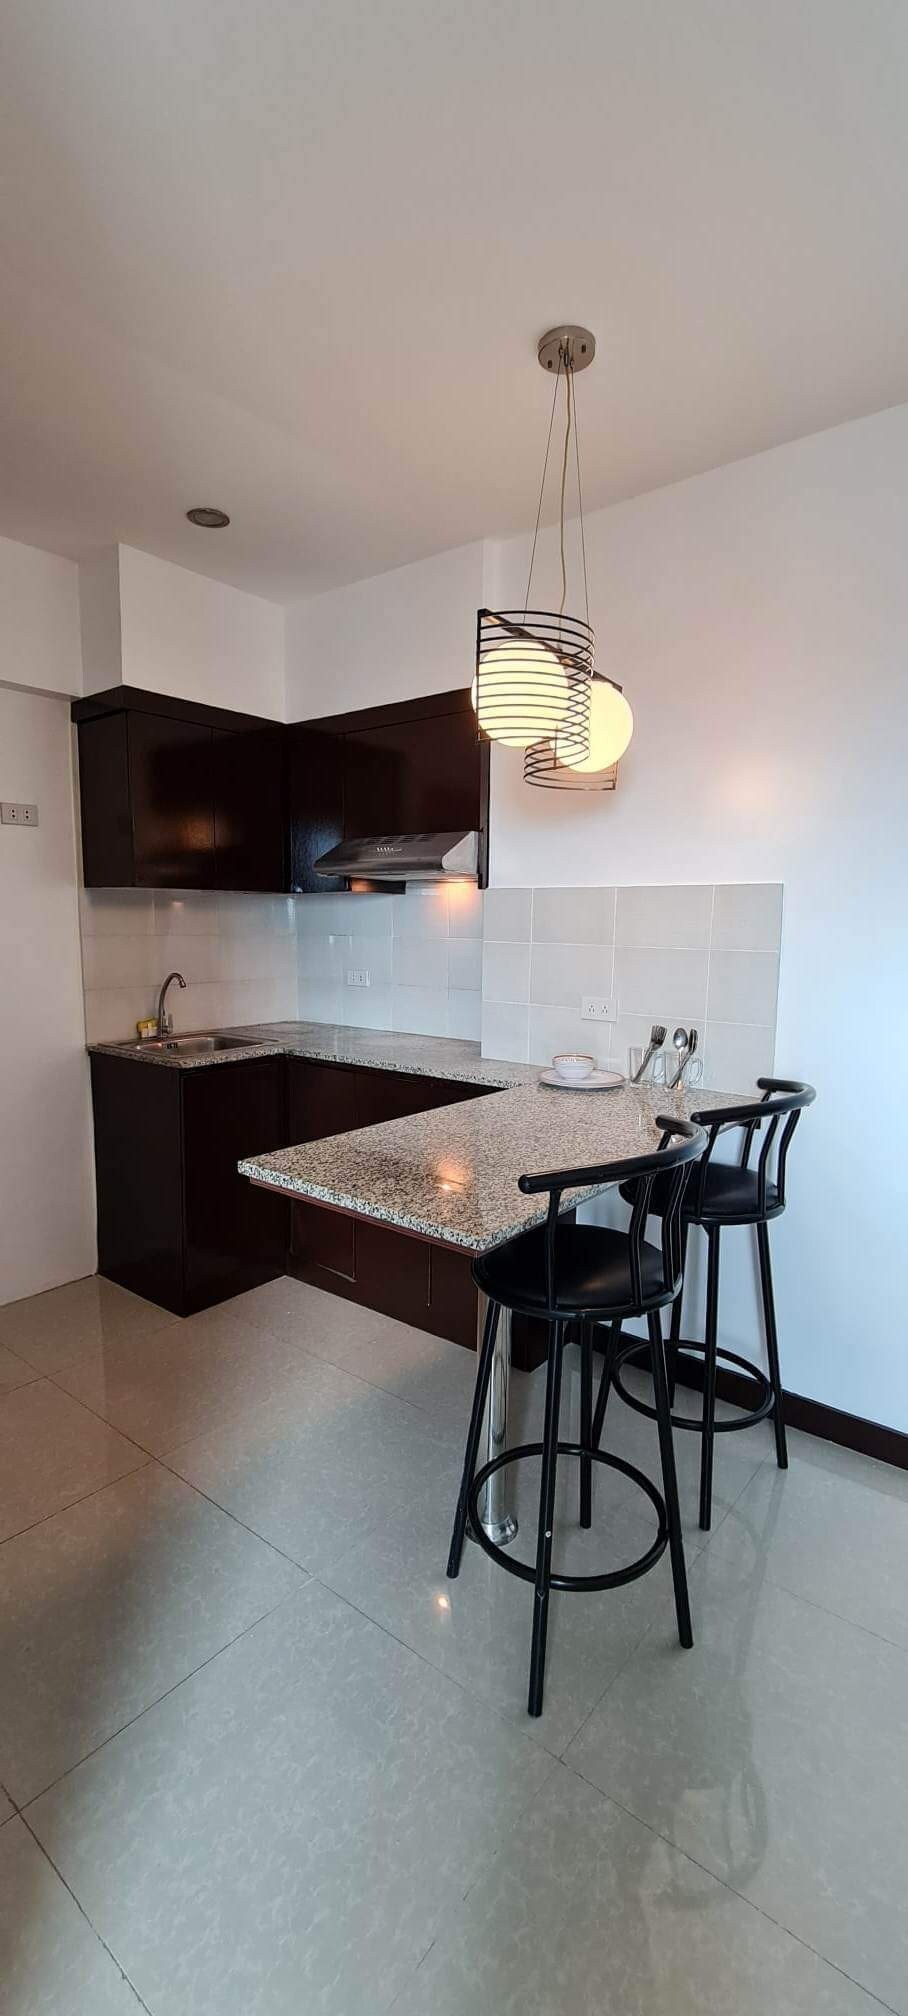 Cebu City Semi-Furnished Condo with a Lovely view